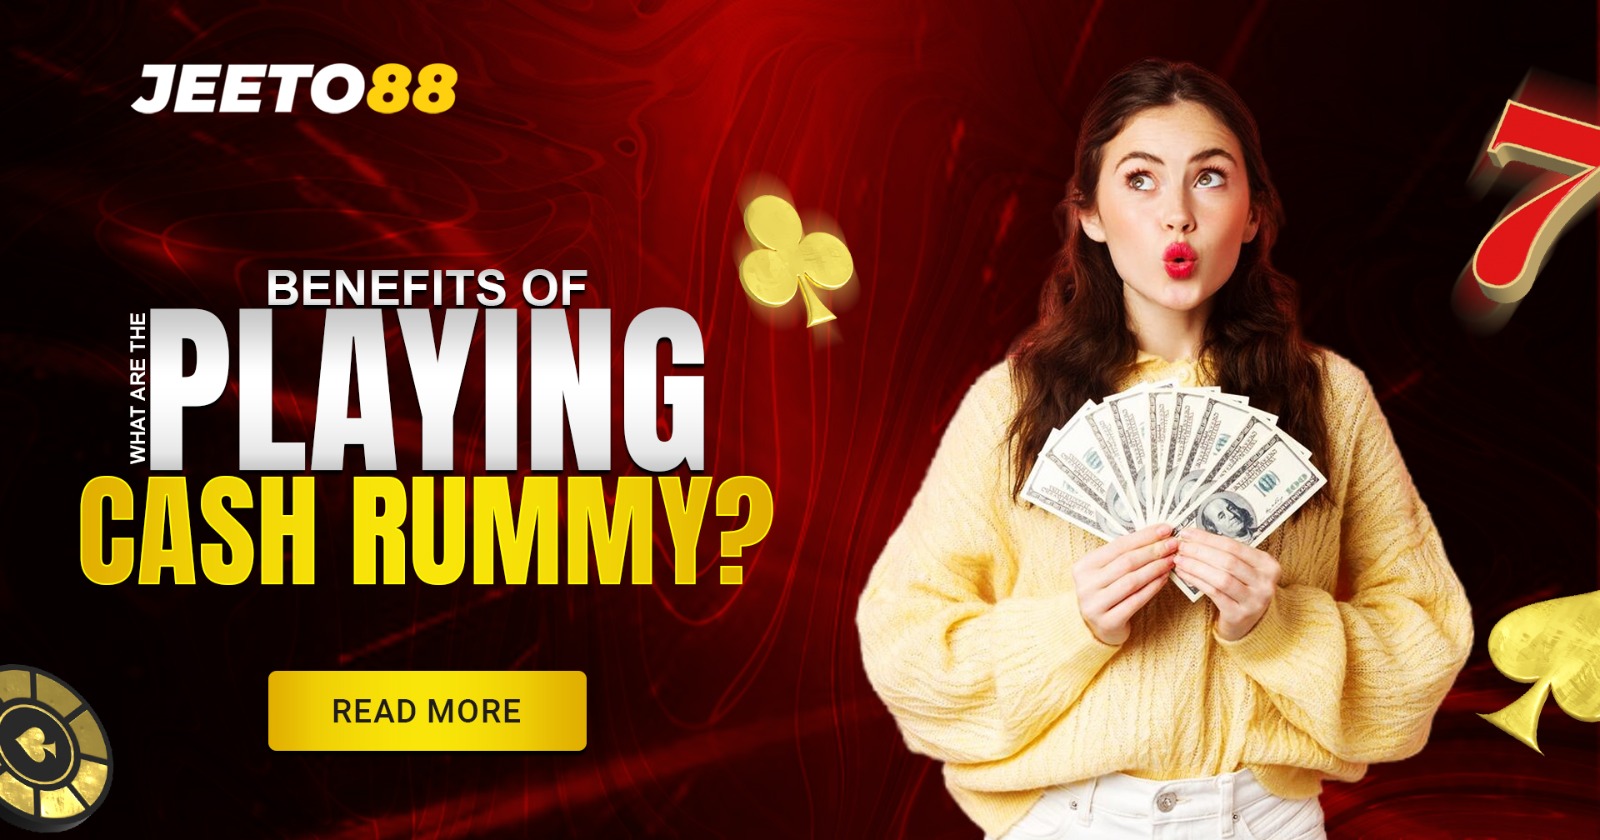 What Are The Benefits Of Playing Cash Rummy? – BizBuildBoom